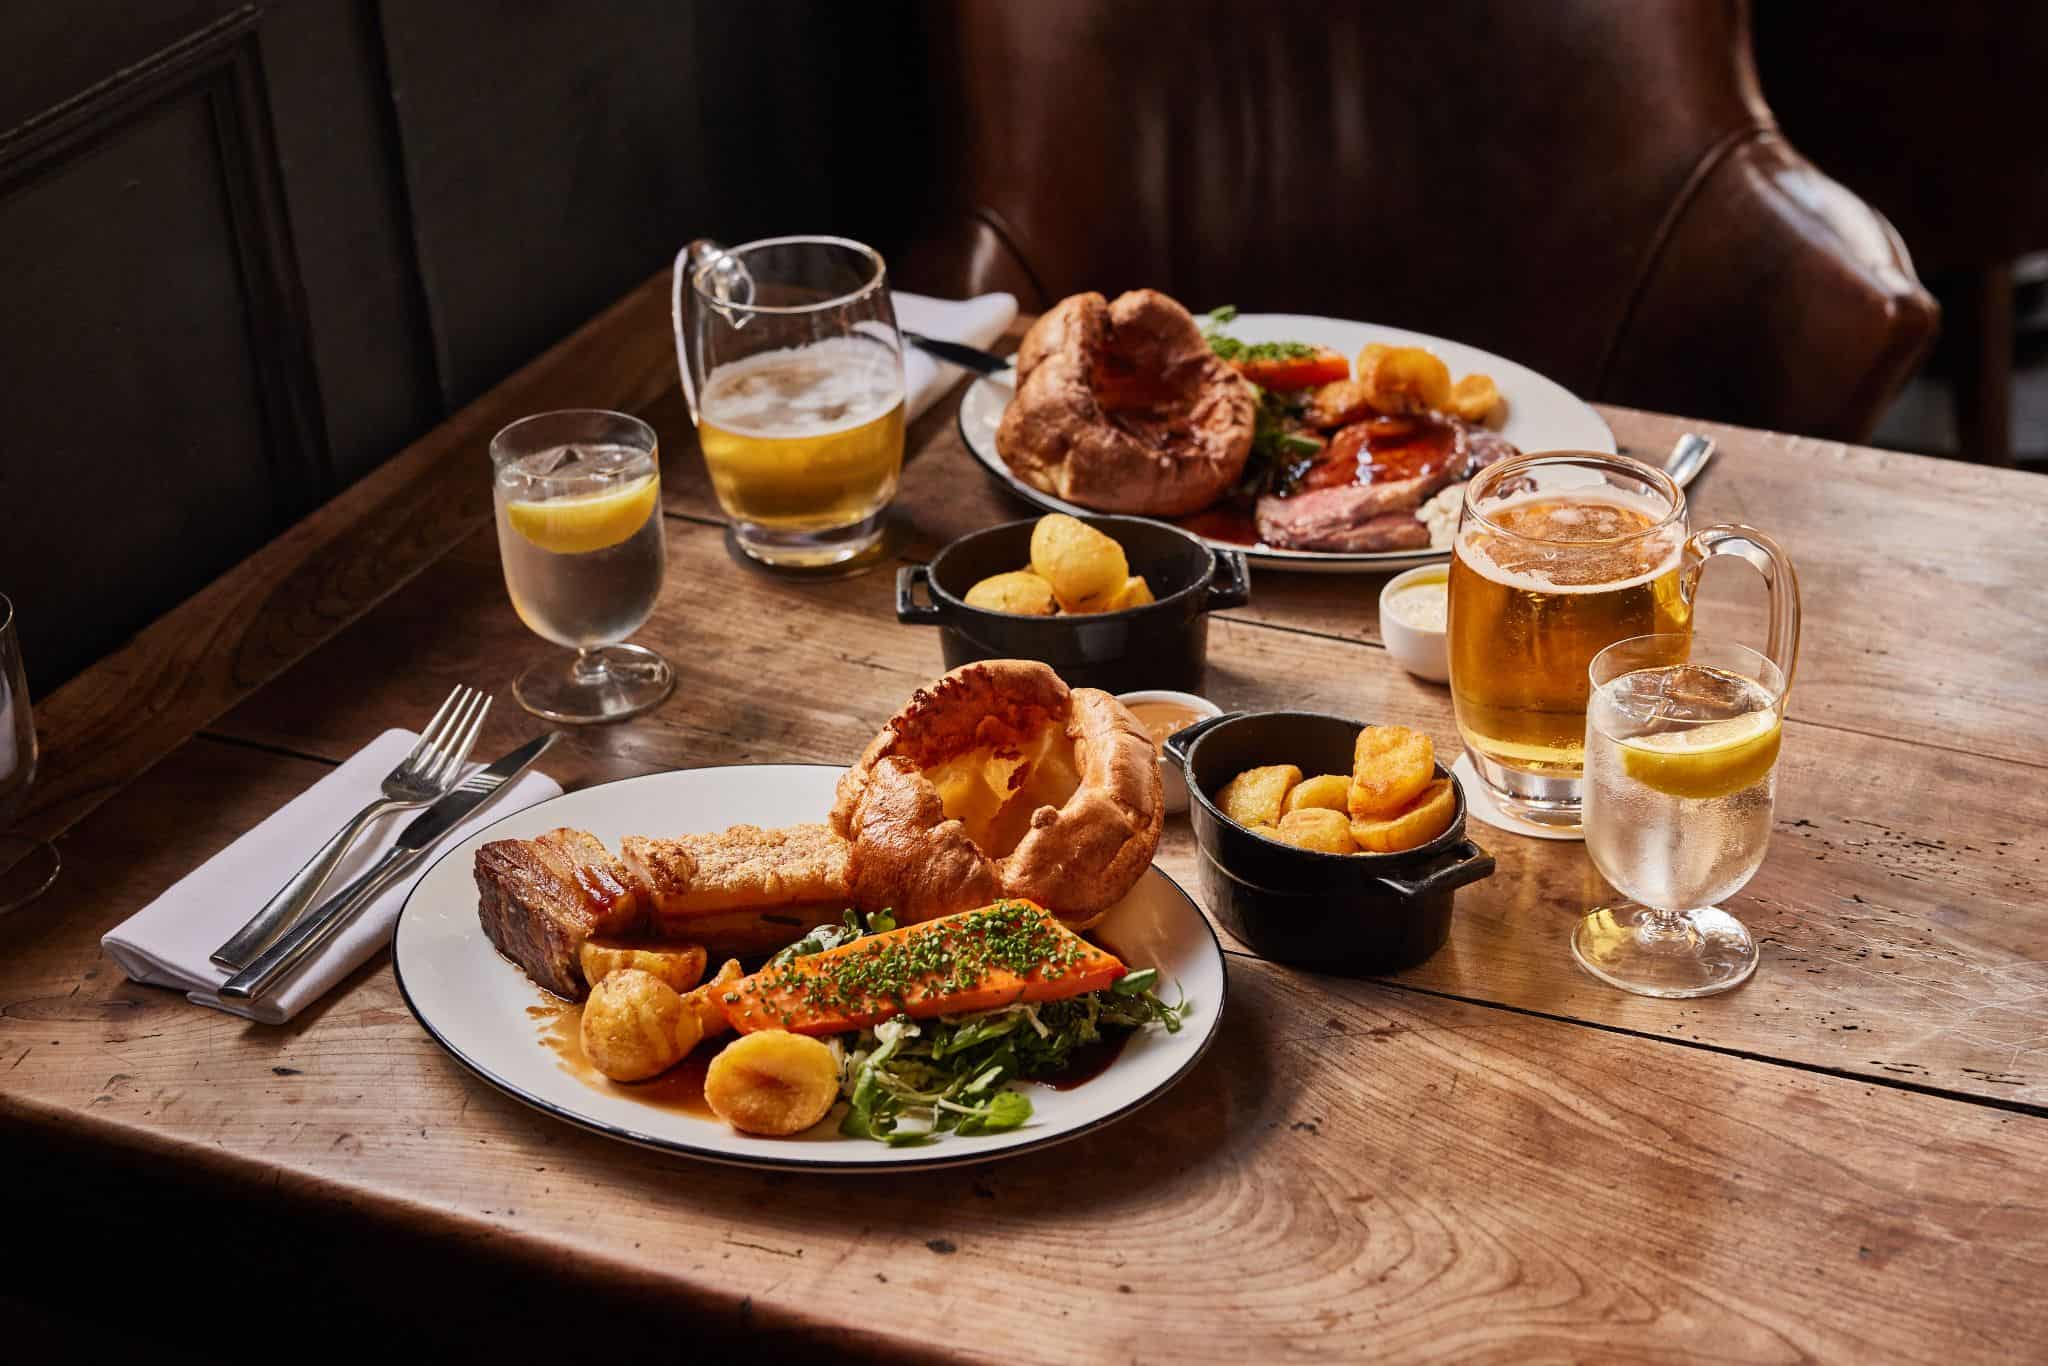 Restaurant review: Sunday lunch at the Chelsea Pig